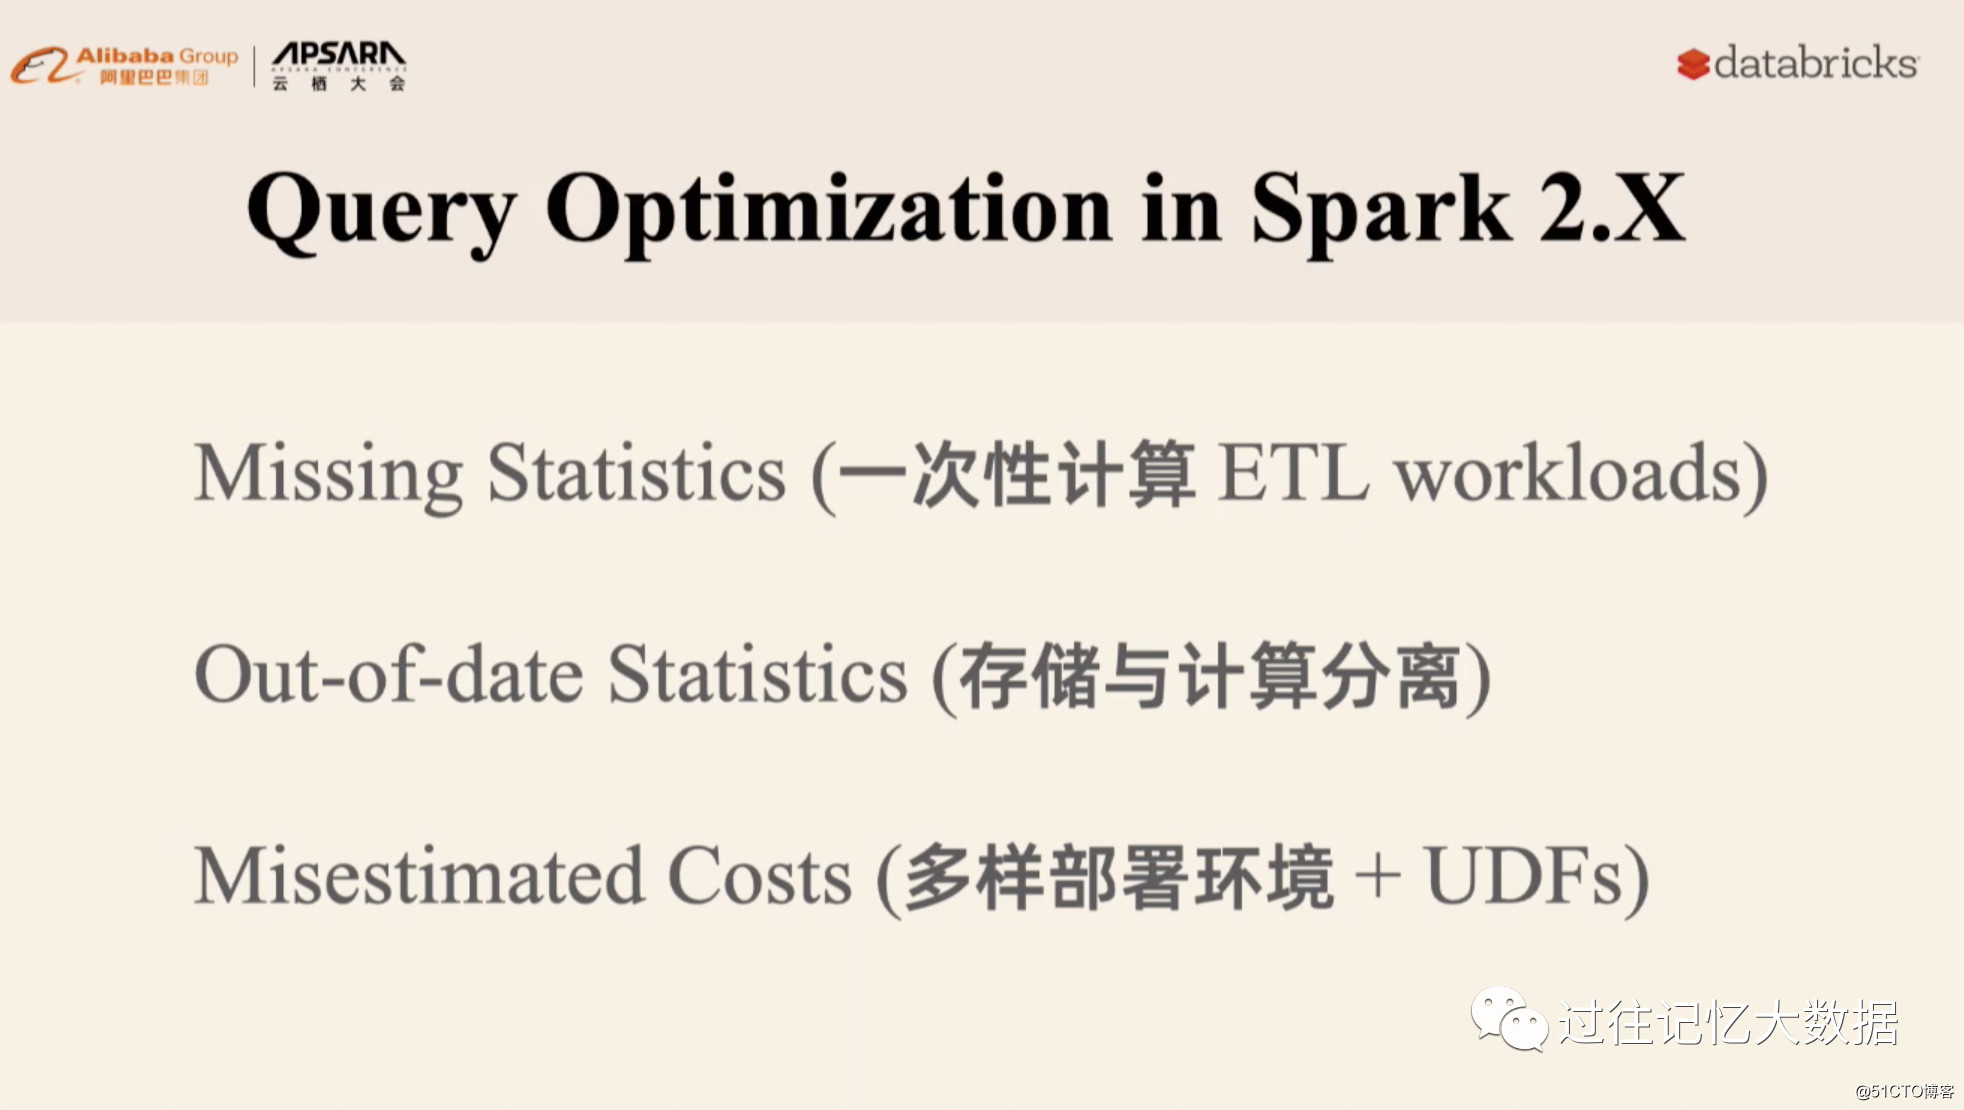 Yunqi Conference | Apache Spark 3.0 and Koalas latest developments